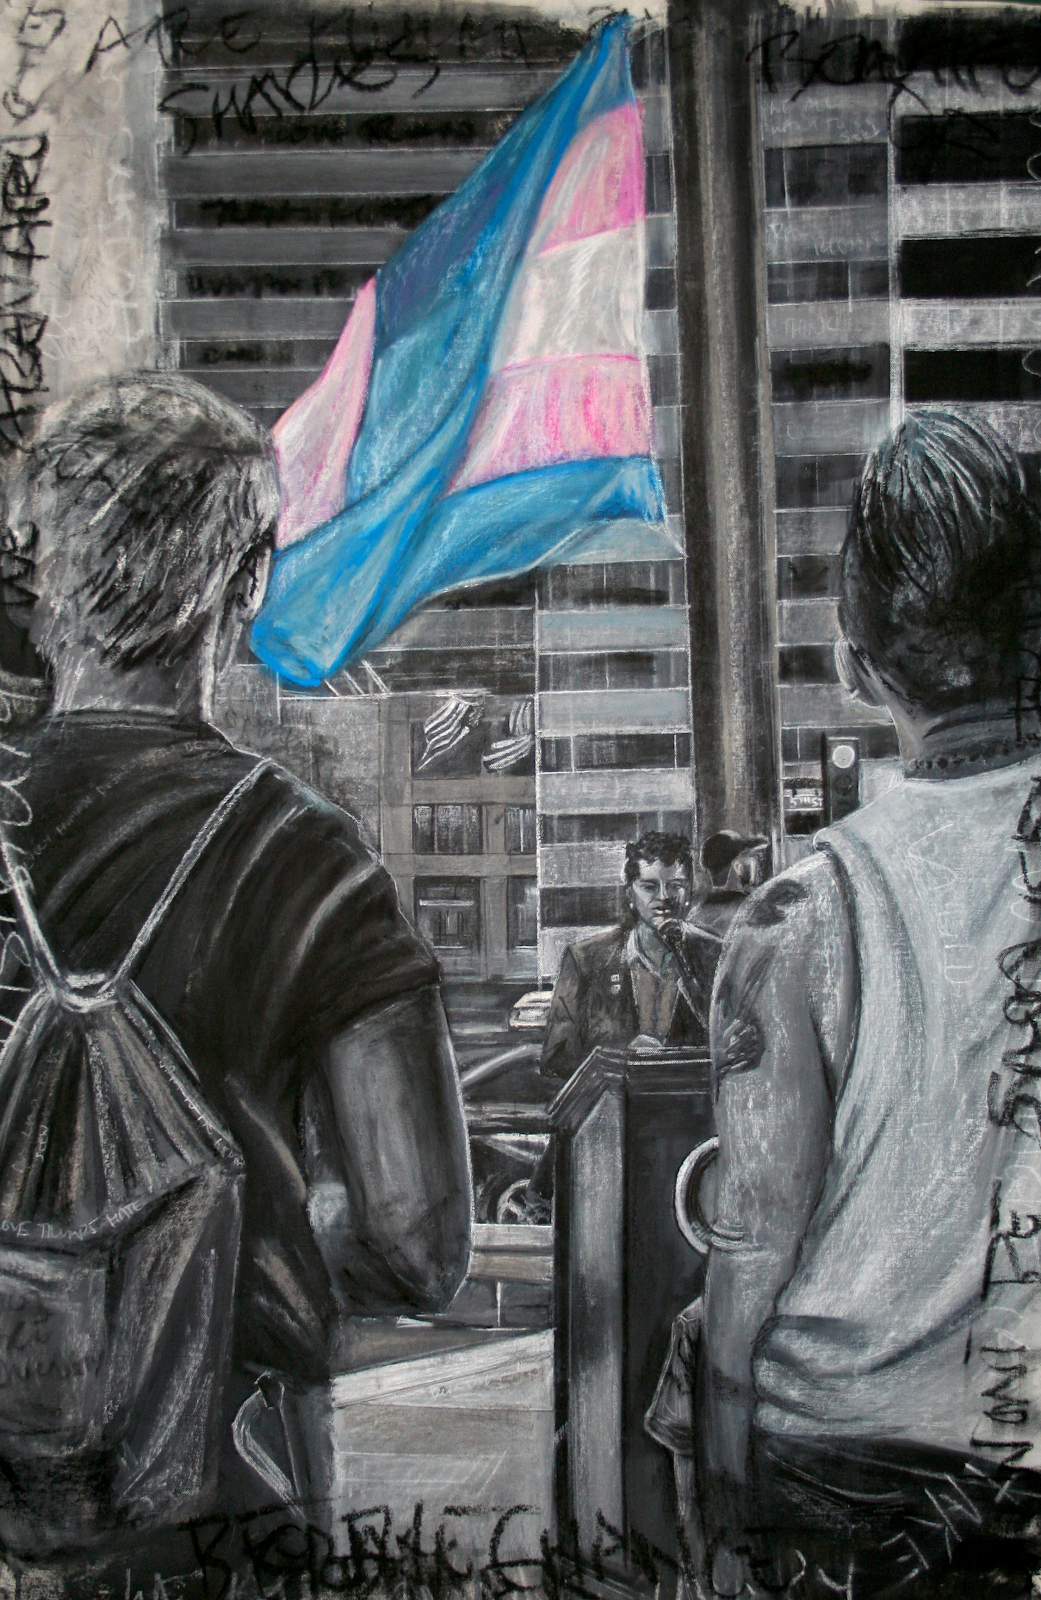 'For Which it Stands' by Devon Reiffer, 2018. Charcoal and pastel on canvas.